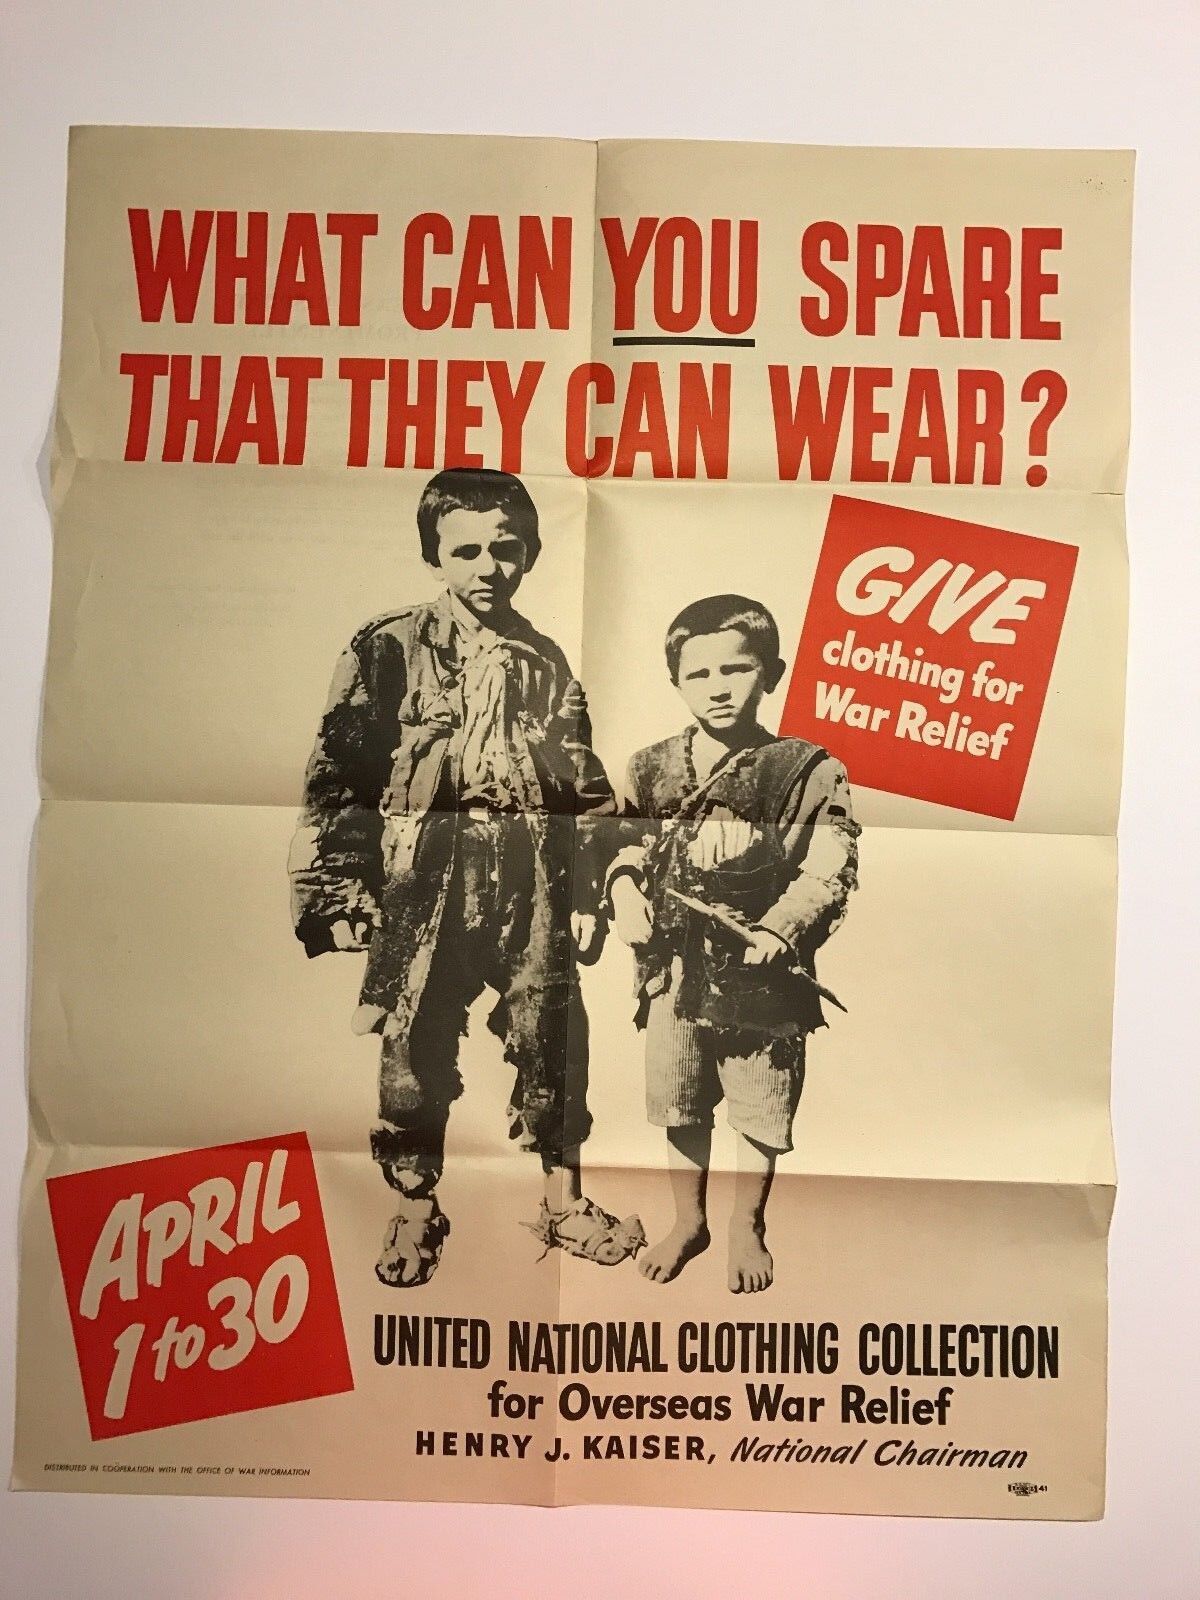 WHAT CAN YOU SPARE THAT THEY CAN WEAR? - WW2 Poster - ORIGINAL